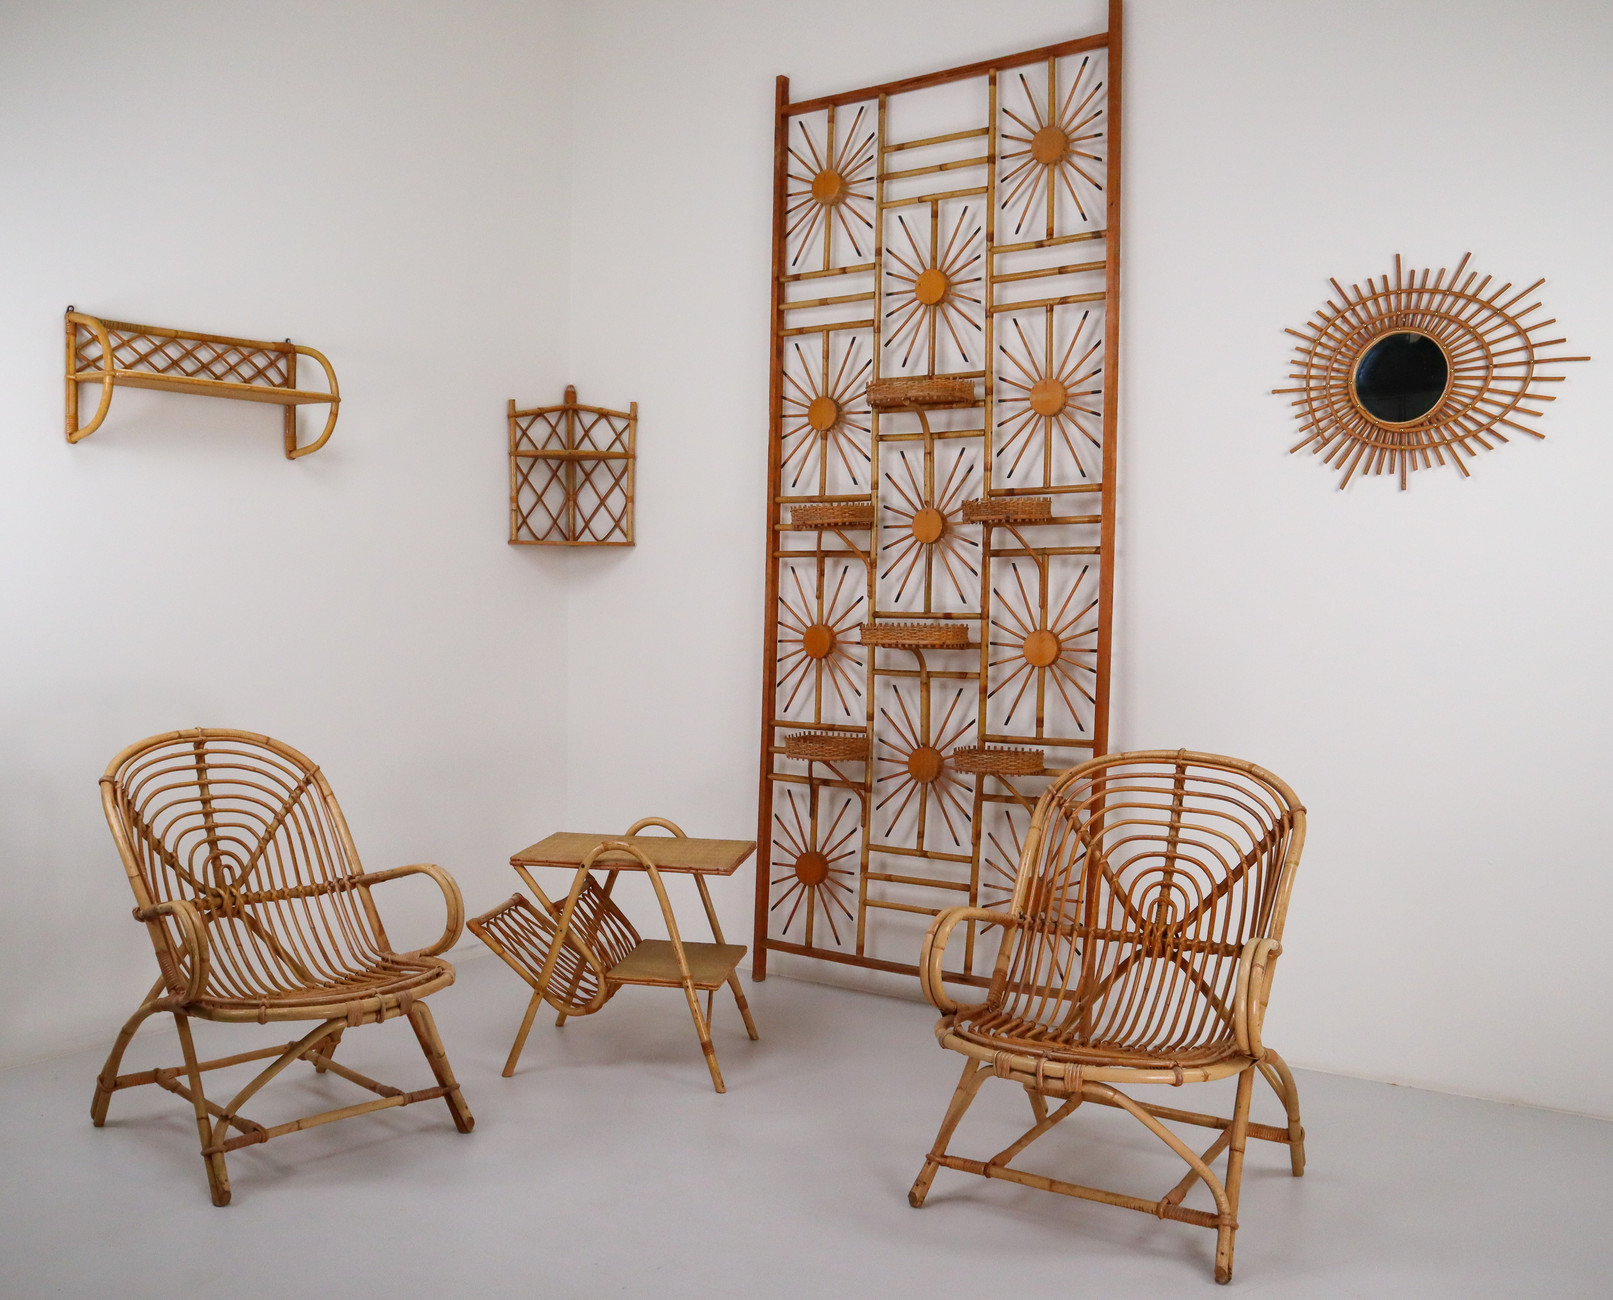 Rattan And Bamboo set of 7 items , France 1960s Mid-20th century